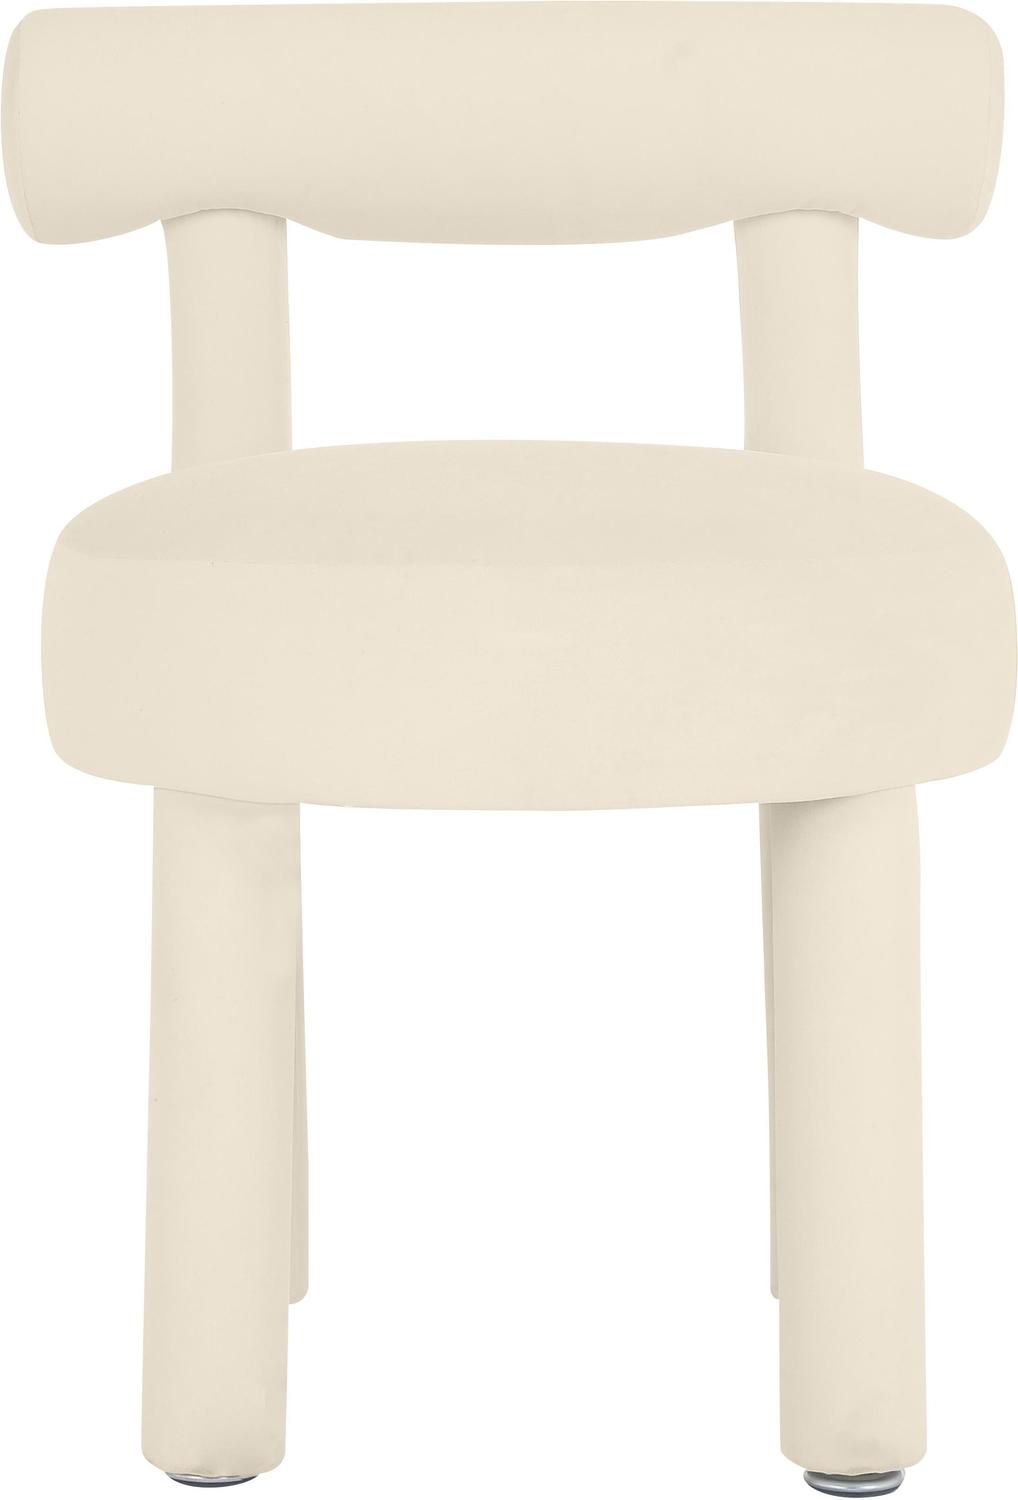 small space dining set Contemporary Design Furniture Dining Chairs Cream